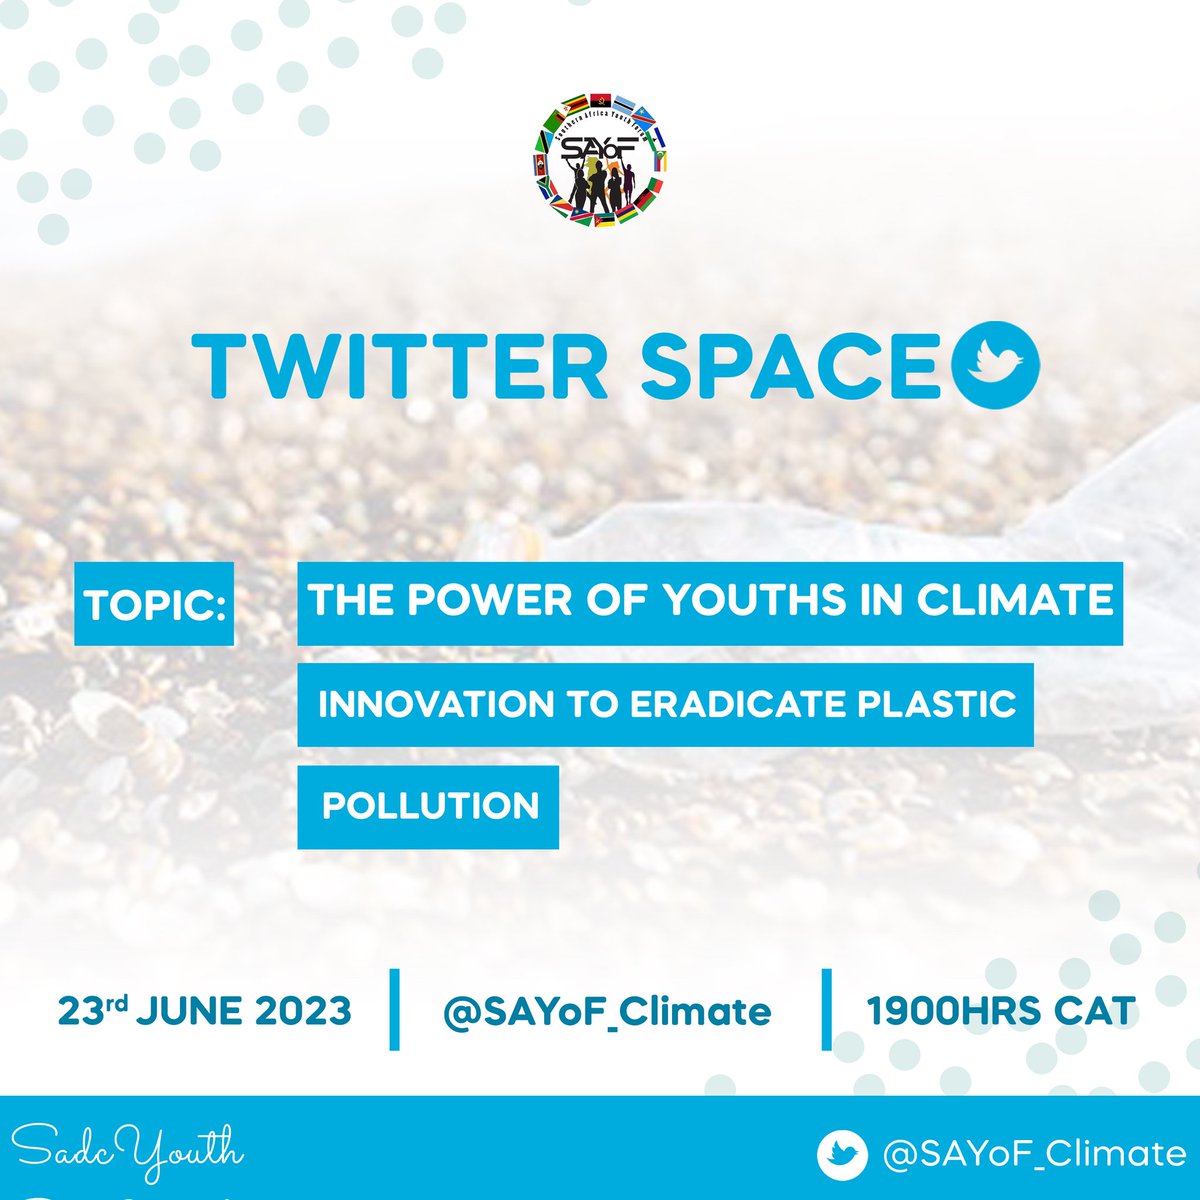 SERIES 2 Twitter Space Alert! 
Join @SAYoF_Climate as we dive into the thrilling world of Climate Innovation 🌎

🗓️ Save the Date: 23rd June 2023
⏰ Time: 19:00HRS CAT 
TOPIC: 'The Power of Youths in Climate Innovation to Eradicate Plastic Pollution'
Link :twitter.com/i/spaces/1nAJE…